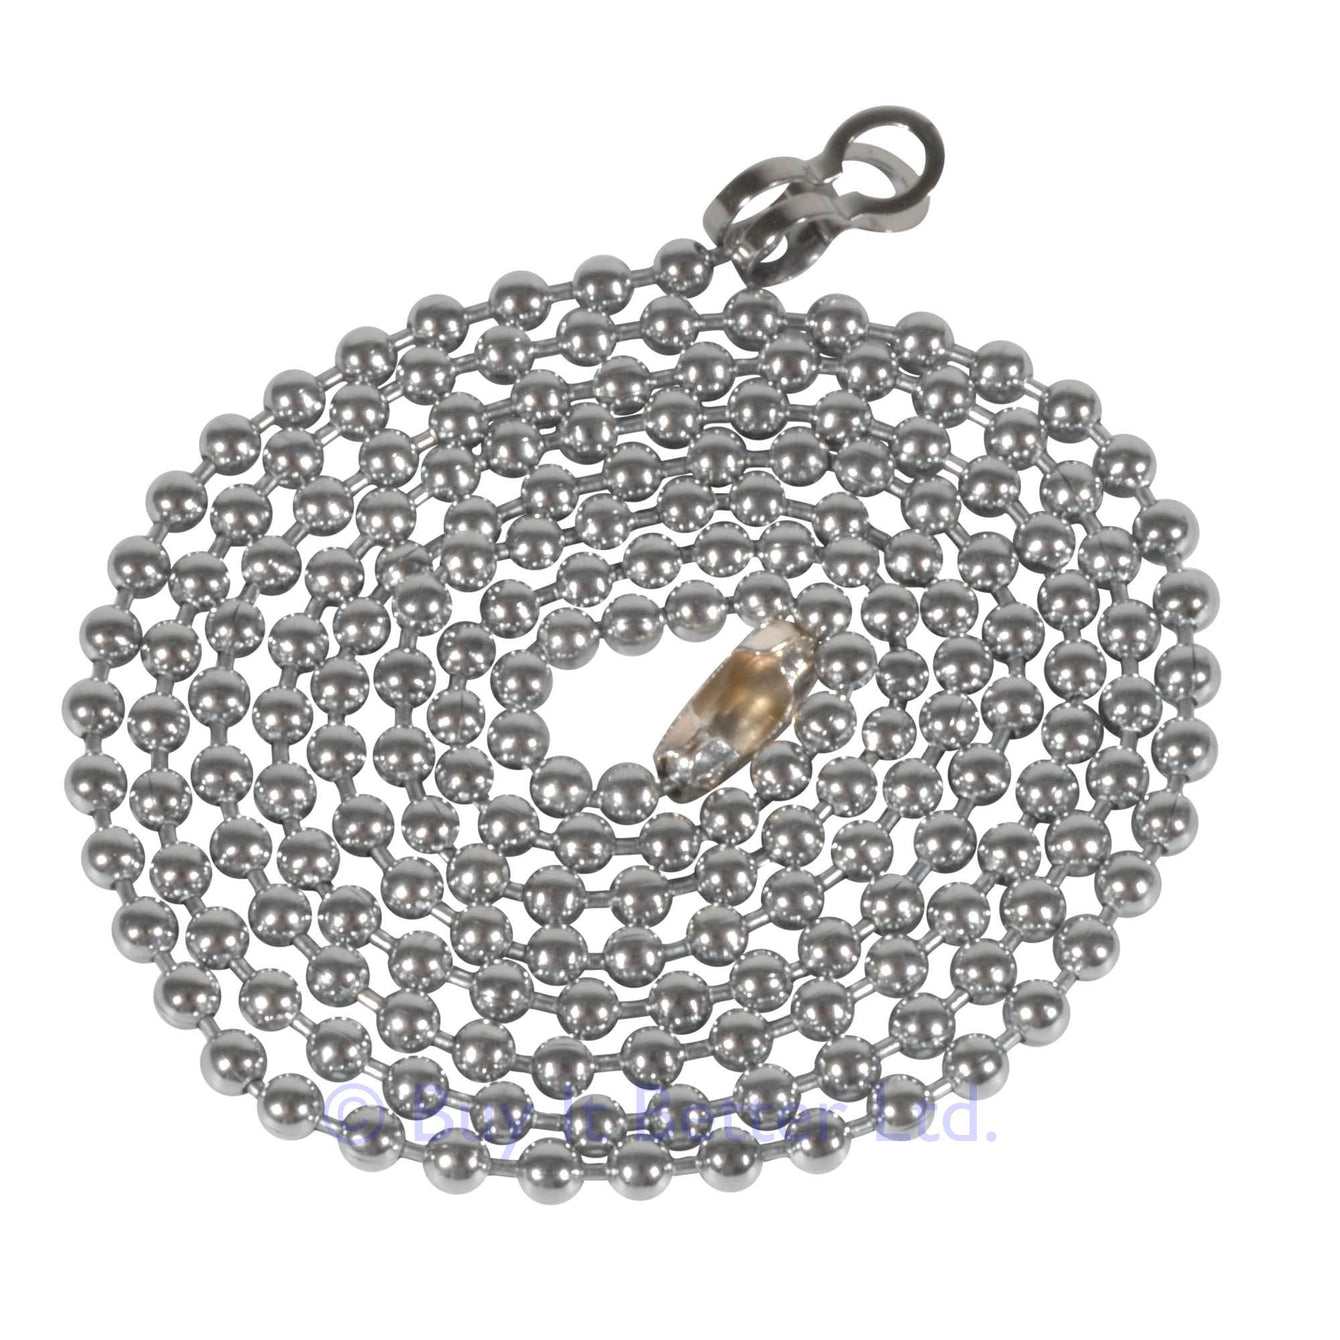 ElekTek Light Pull Chain Extension With Ball Chain Connector 800mm Long - Buy It Better Brass